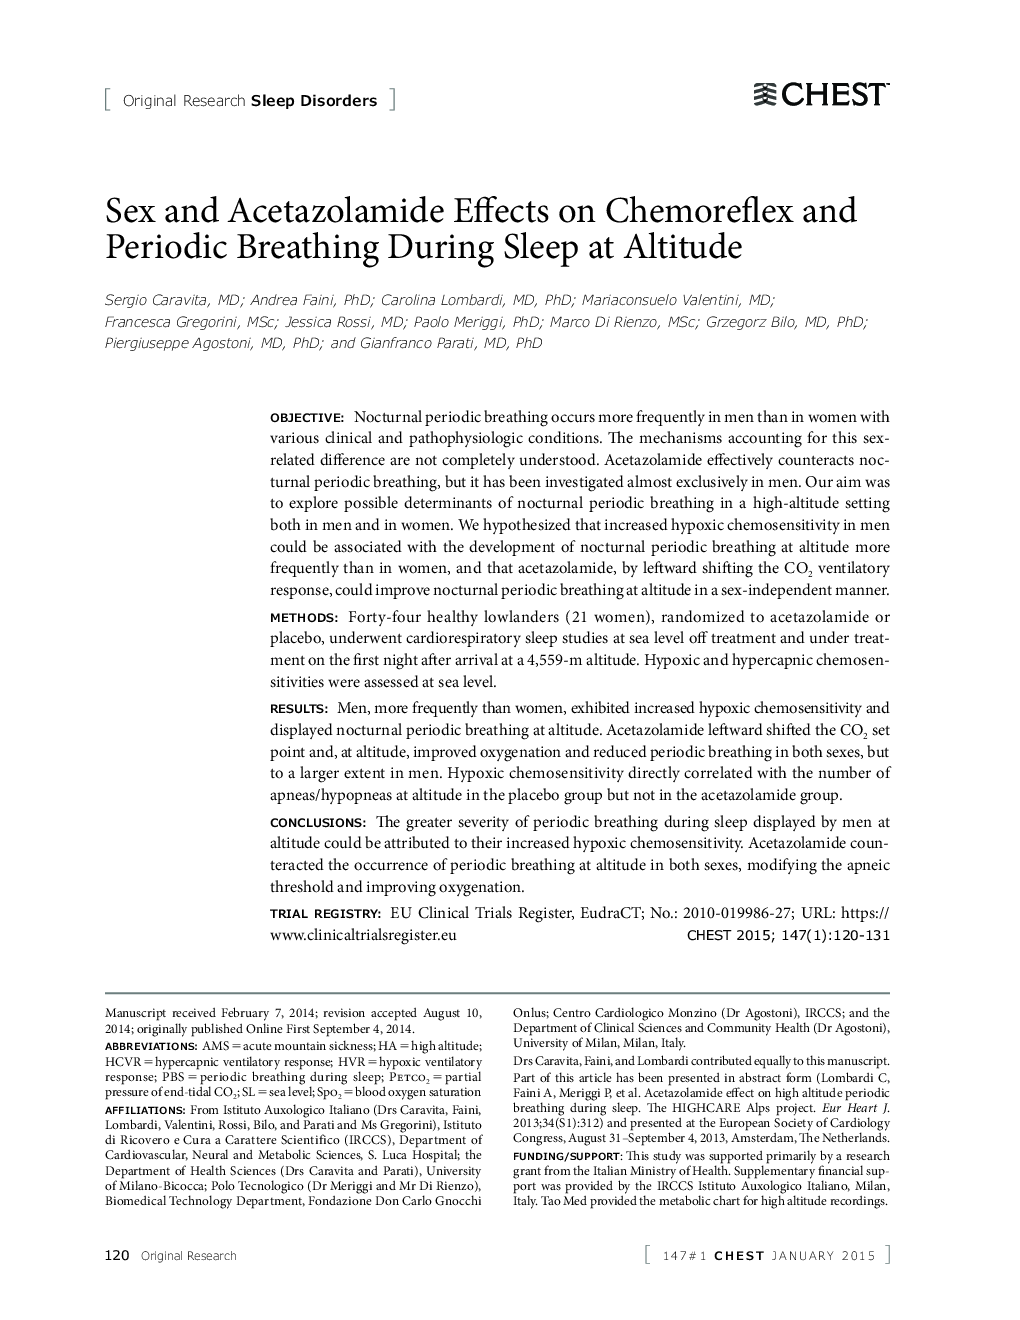 Sex and Acetazolamide Effects on Chemoreflex and Periodic Breathing During Sleep at Altitude